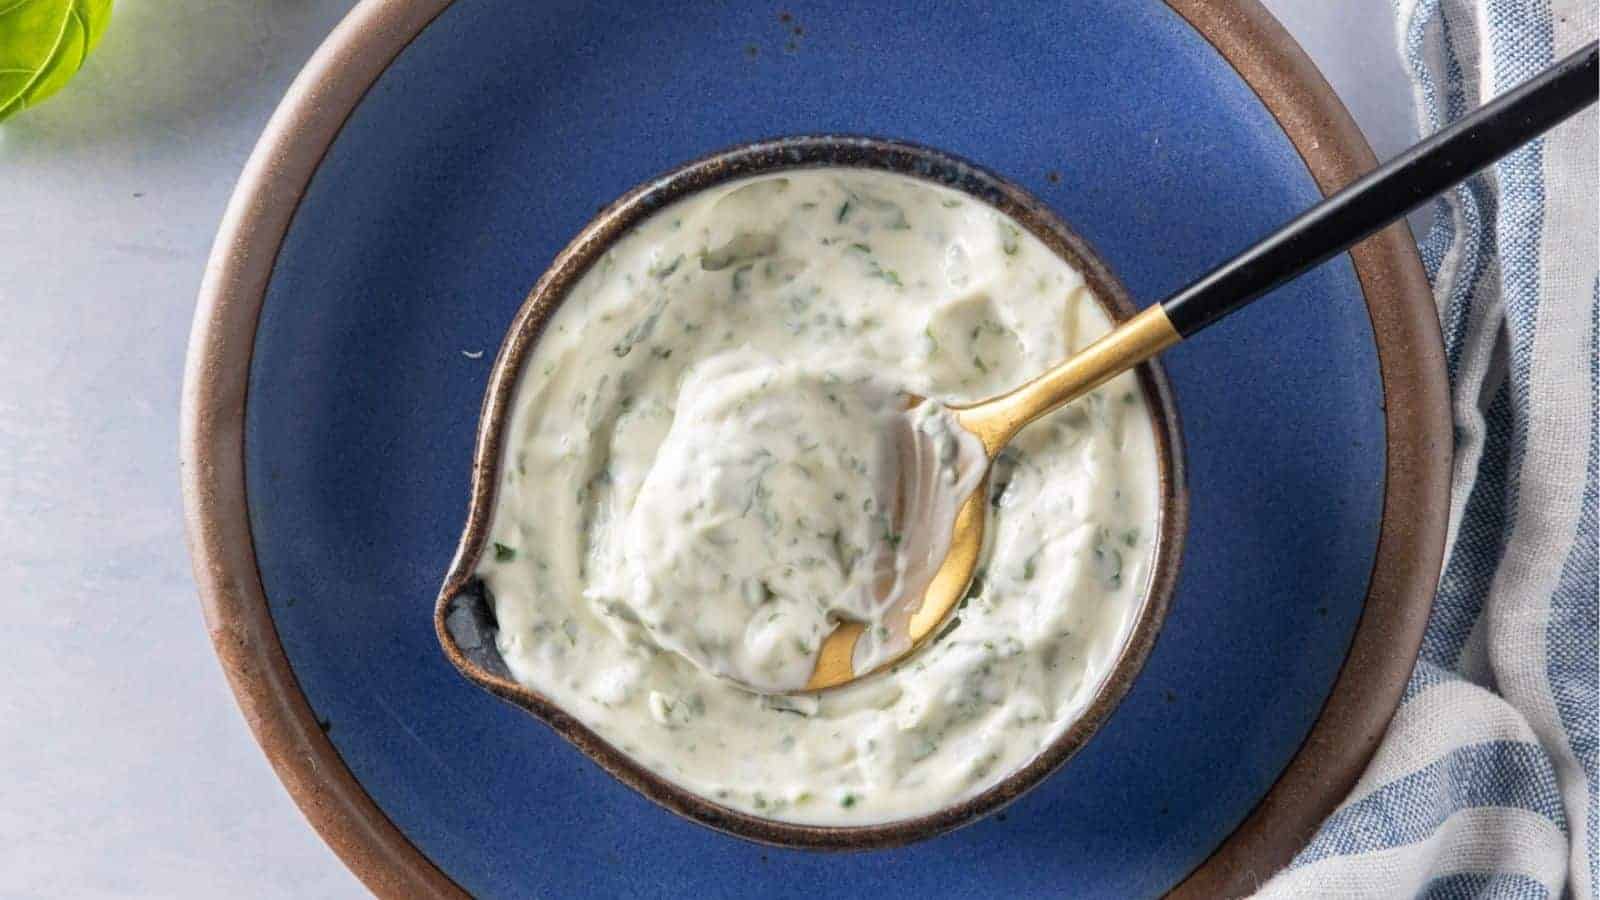 A top-down view of a small bowl filled with basil mayonnaise on a blue plate.